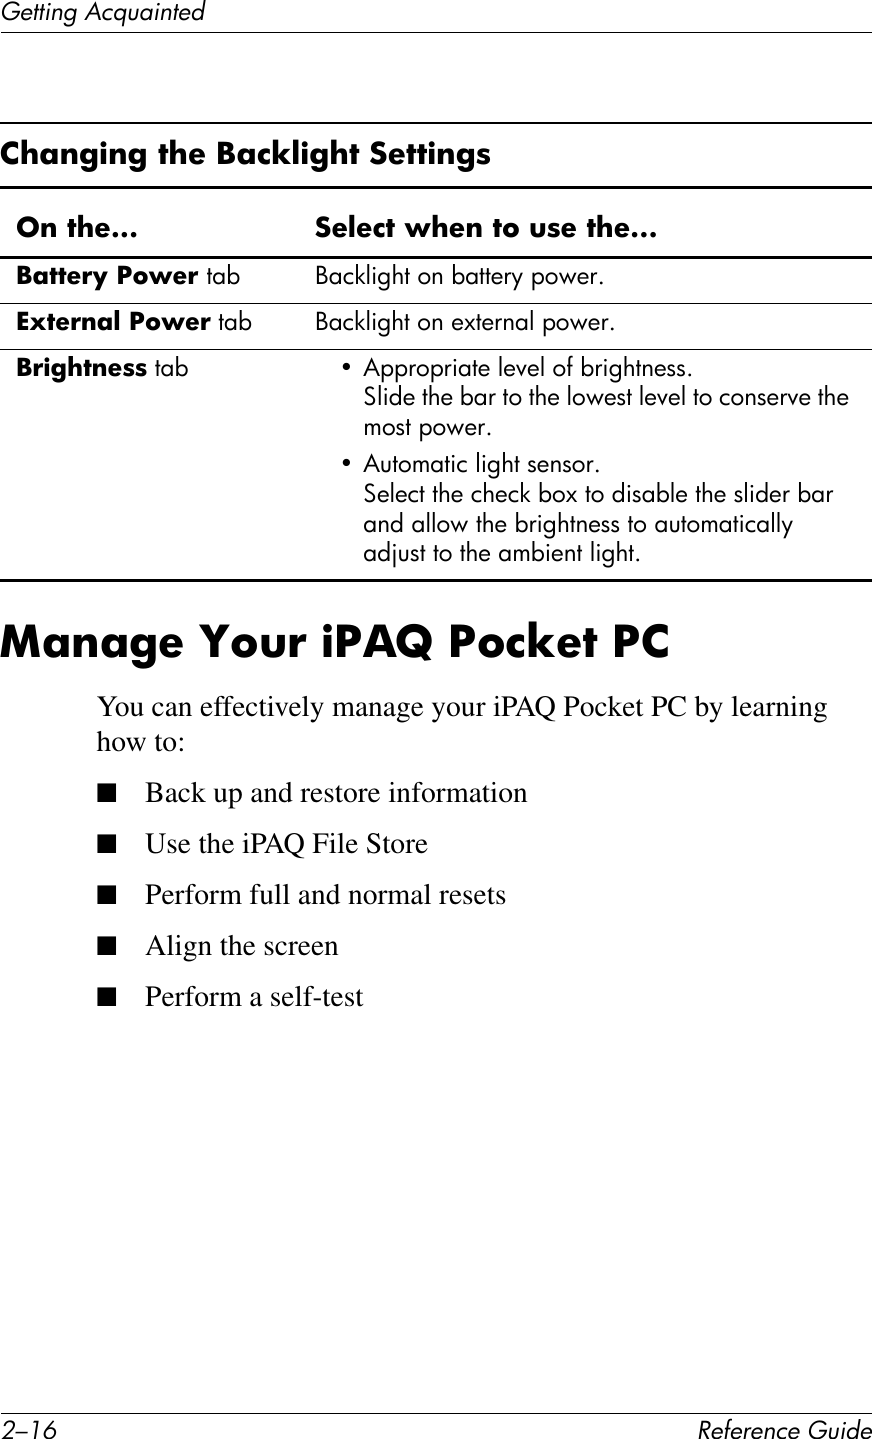 0/.E !&quot;#&quot;$&quot;%&amp;&quot;&apos;()*+&quot;(&quot;11*%2&apos;&lt;&amp;T)4*%1&quot;+Y;$;&apos;&quot;&amp;c6(!&amp;)S,b&amp;S6%T&quot;7&amp;S2You can effectively manage your iPAQ Pocket PC by learning how to:■Back up and restore information■Use the iPAQ File Store■Perform full and normal resets■Align the screen■Perform a self-test2?;$&apos;)$&apos;&amp;7?&quot;&amp;C;%T@)&apos;?7&amp;:&quot;77)$&apos;85$&amp;7?&quot;___ :&quot;@&quot;%7&amp;L?&quot;$&amp;76&amp;(8&quot;&amp;7?&quot;___C;77&quot;!O&amp;S6L&quot;!&amp;,79 Q7)*D$H!,#(6#97,,+2F#&quot;(E+2G^Q7&quot;!$;@&amp;S6L&quot;!#,79 Q7)*D$H!,#(6#+A,+267D#&quot;(E+2GC!)&apos;?7$&quot;88#,79 V &amp;&quot;&quot;2(&quot;2$7,+#D+P+D#(B#92$H!,6+11GND$C+#,!+#972#,(#,!+#D(E+1,#D+P+D#,(#)(61+2P+#,!+#5(1,#&quot;(E+2GV &amp;4,(57,$)#D$H!,#1+61(2GN+D+),#,!+#)!+)*#9(A#,(#C$179D+#,!+#1D$C+2#972#76C#7DD(E#,!+#92$H!,6+11#,(#74,(57,$)7DDF#7C[41,#,(#,!+#759$+6,#D$H!,G